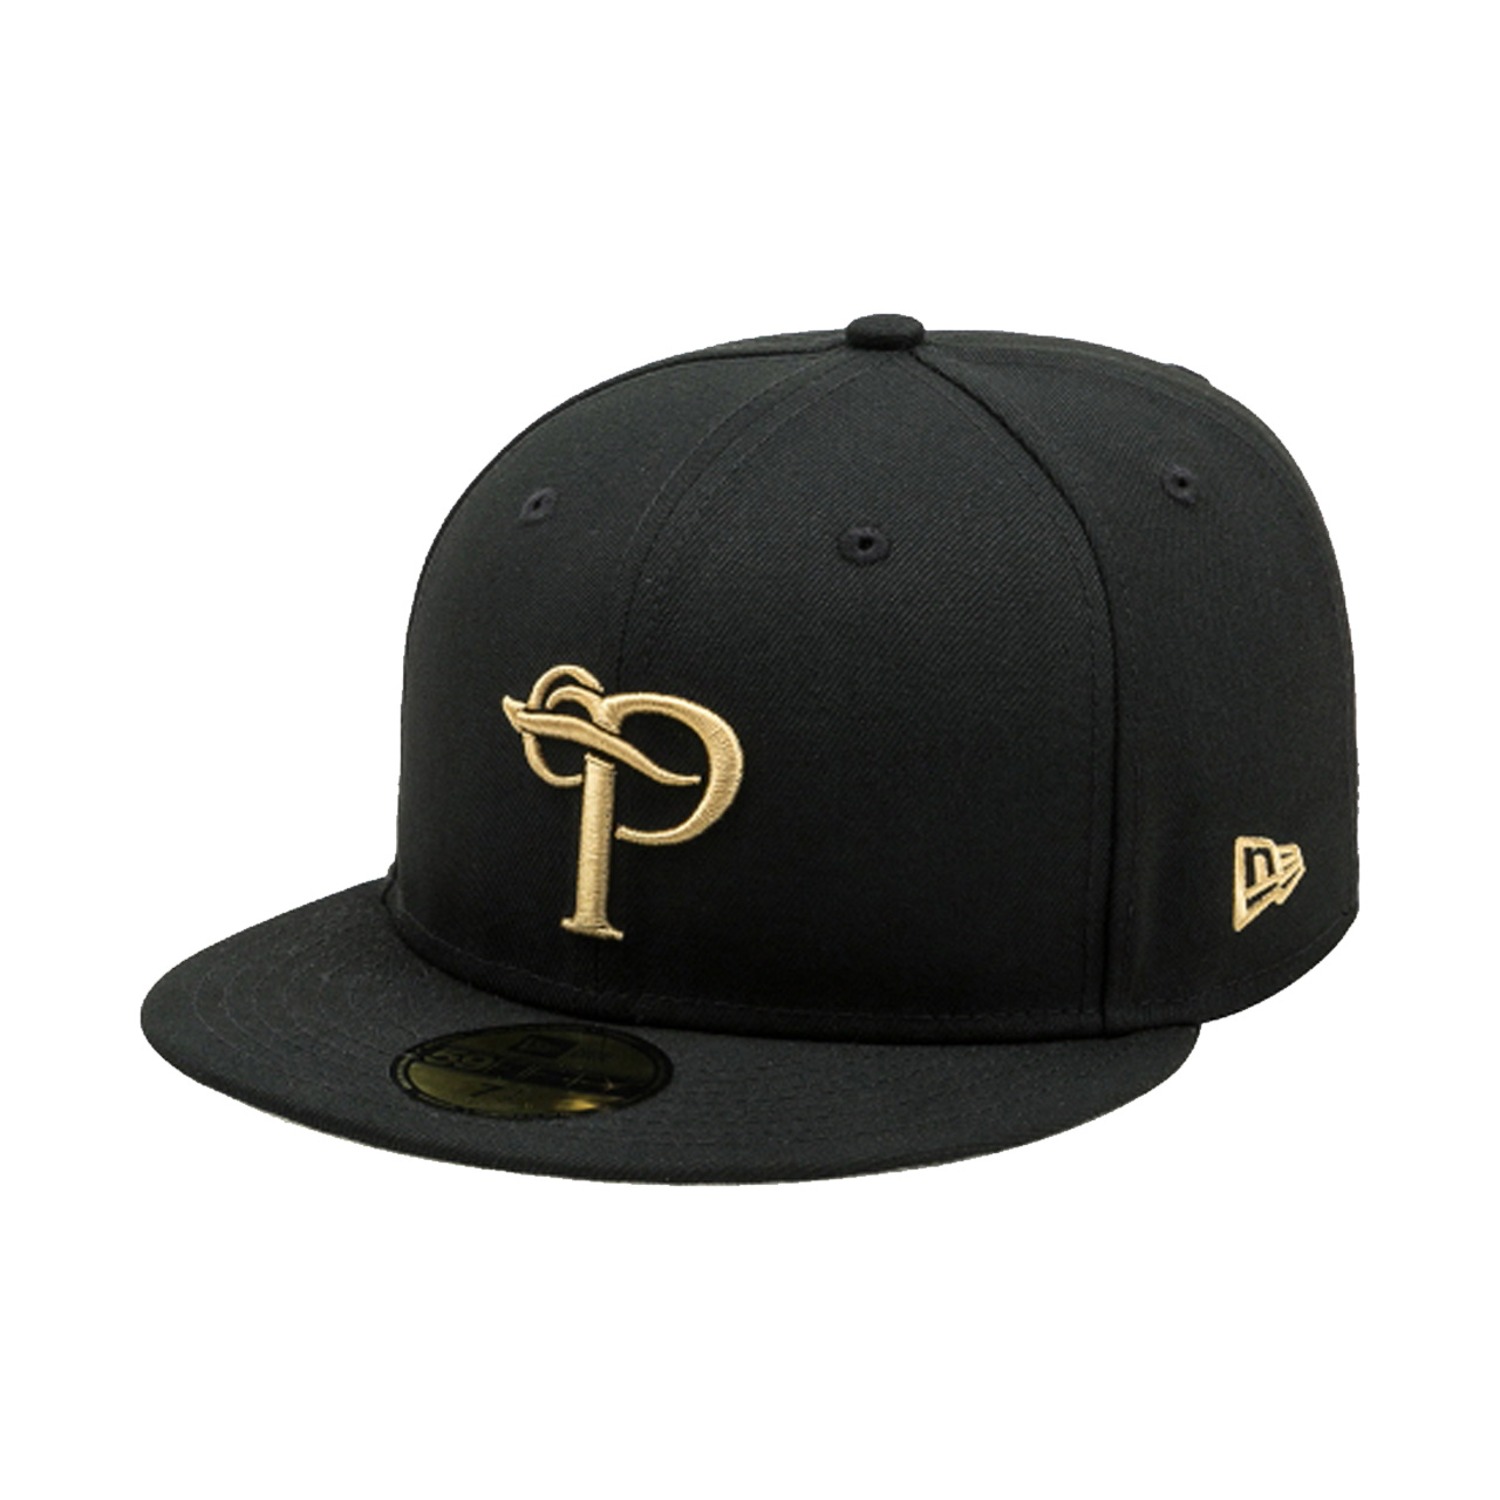 5950 OVER THE PITCH LOGO CAP (BLACK GOLD)